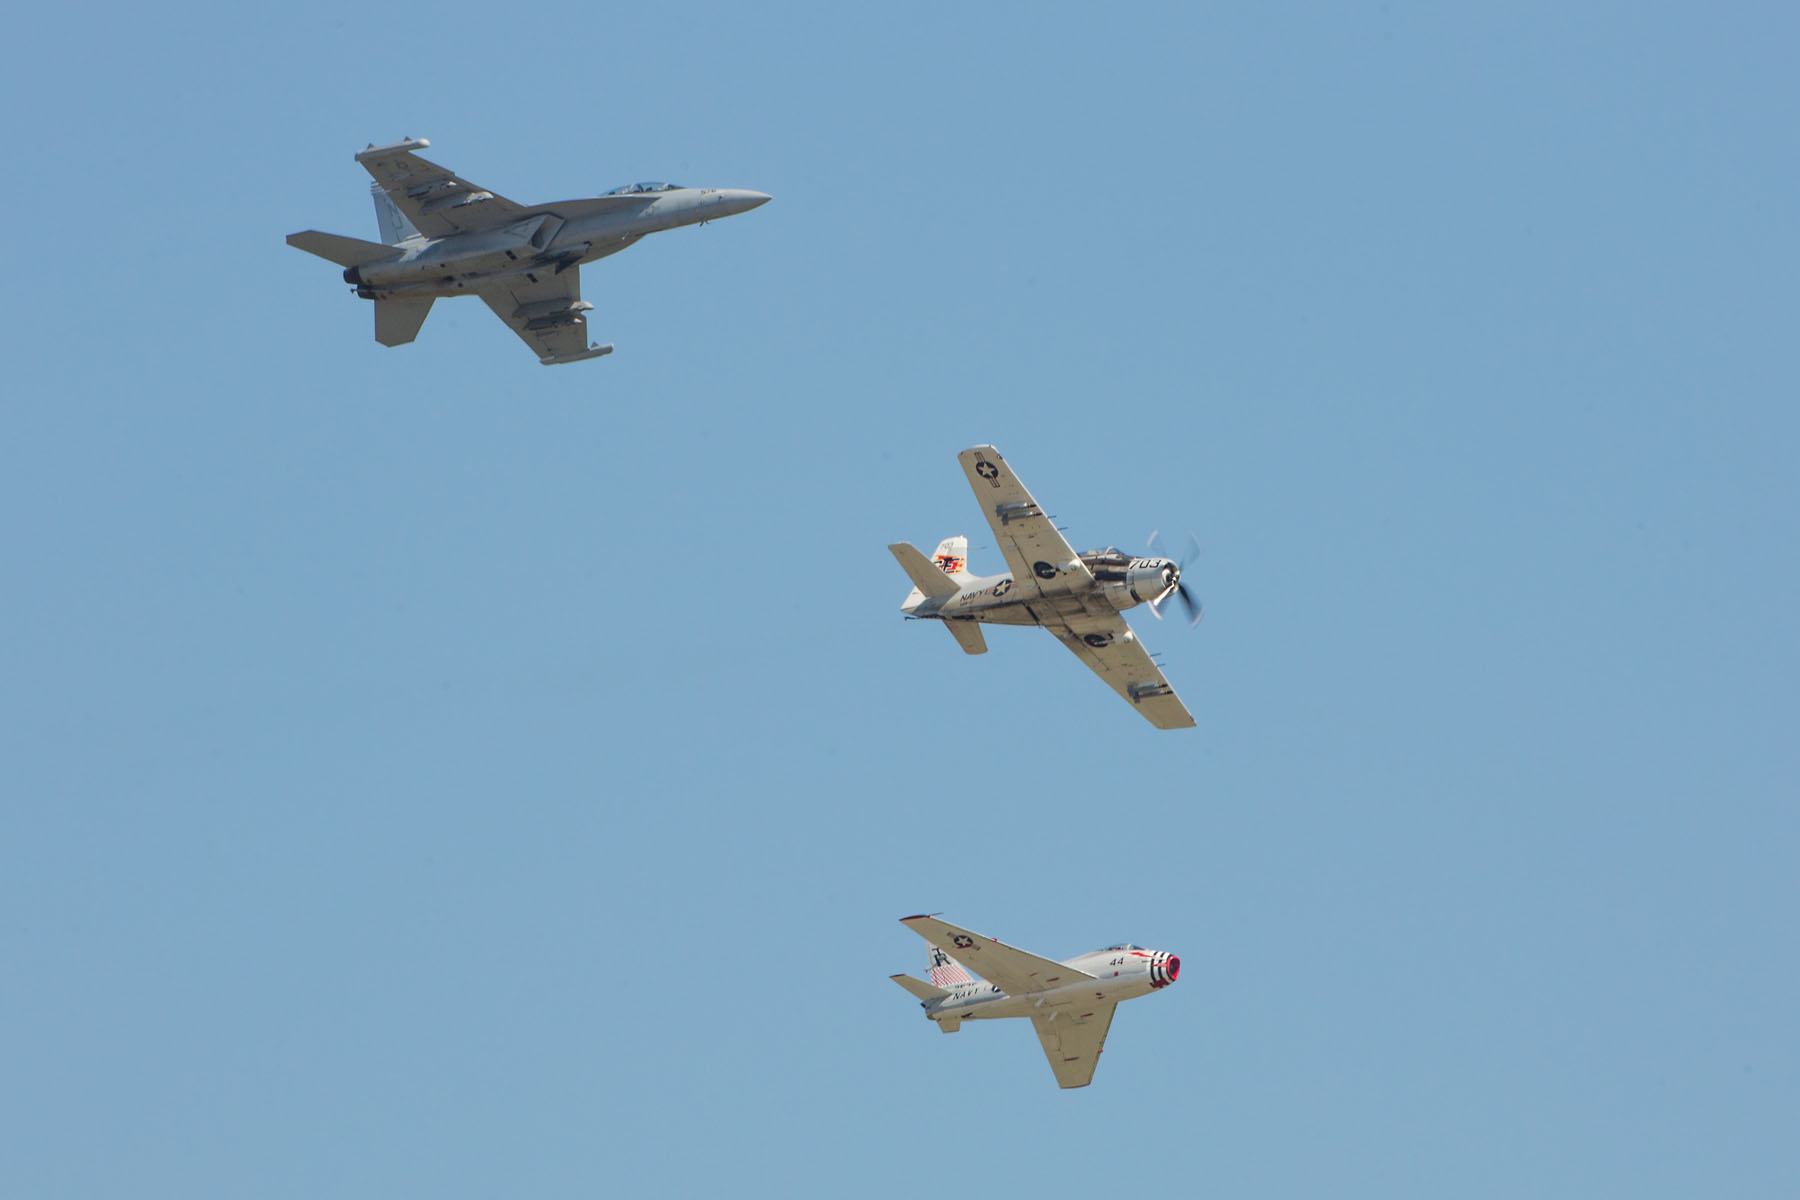 Heritage flight, Sioux Falls Air Show.  The flight featured Navy planes (from top) F/A-18 Hornet, AD-4 Skyraider, and FJ-4B Fury.  Click for next photo.